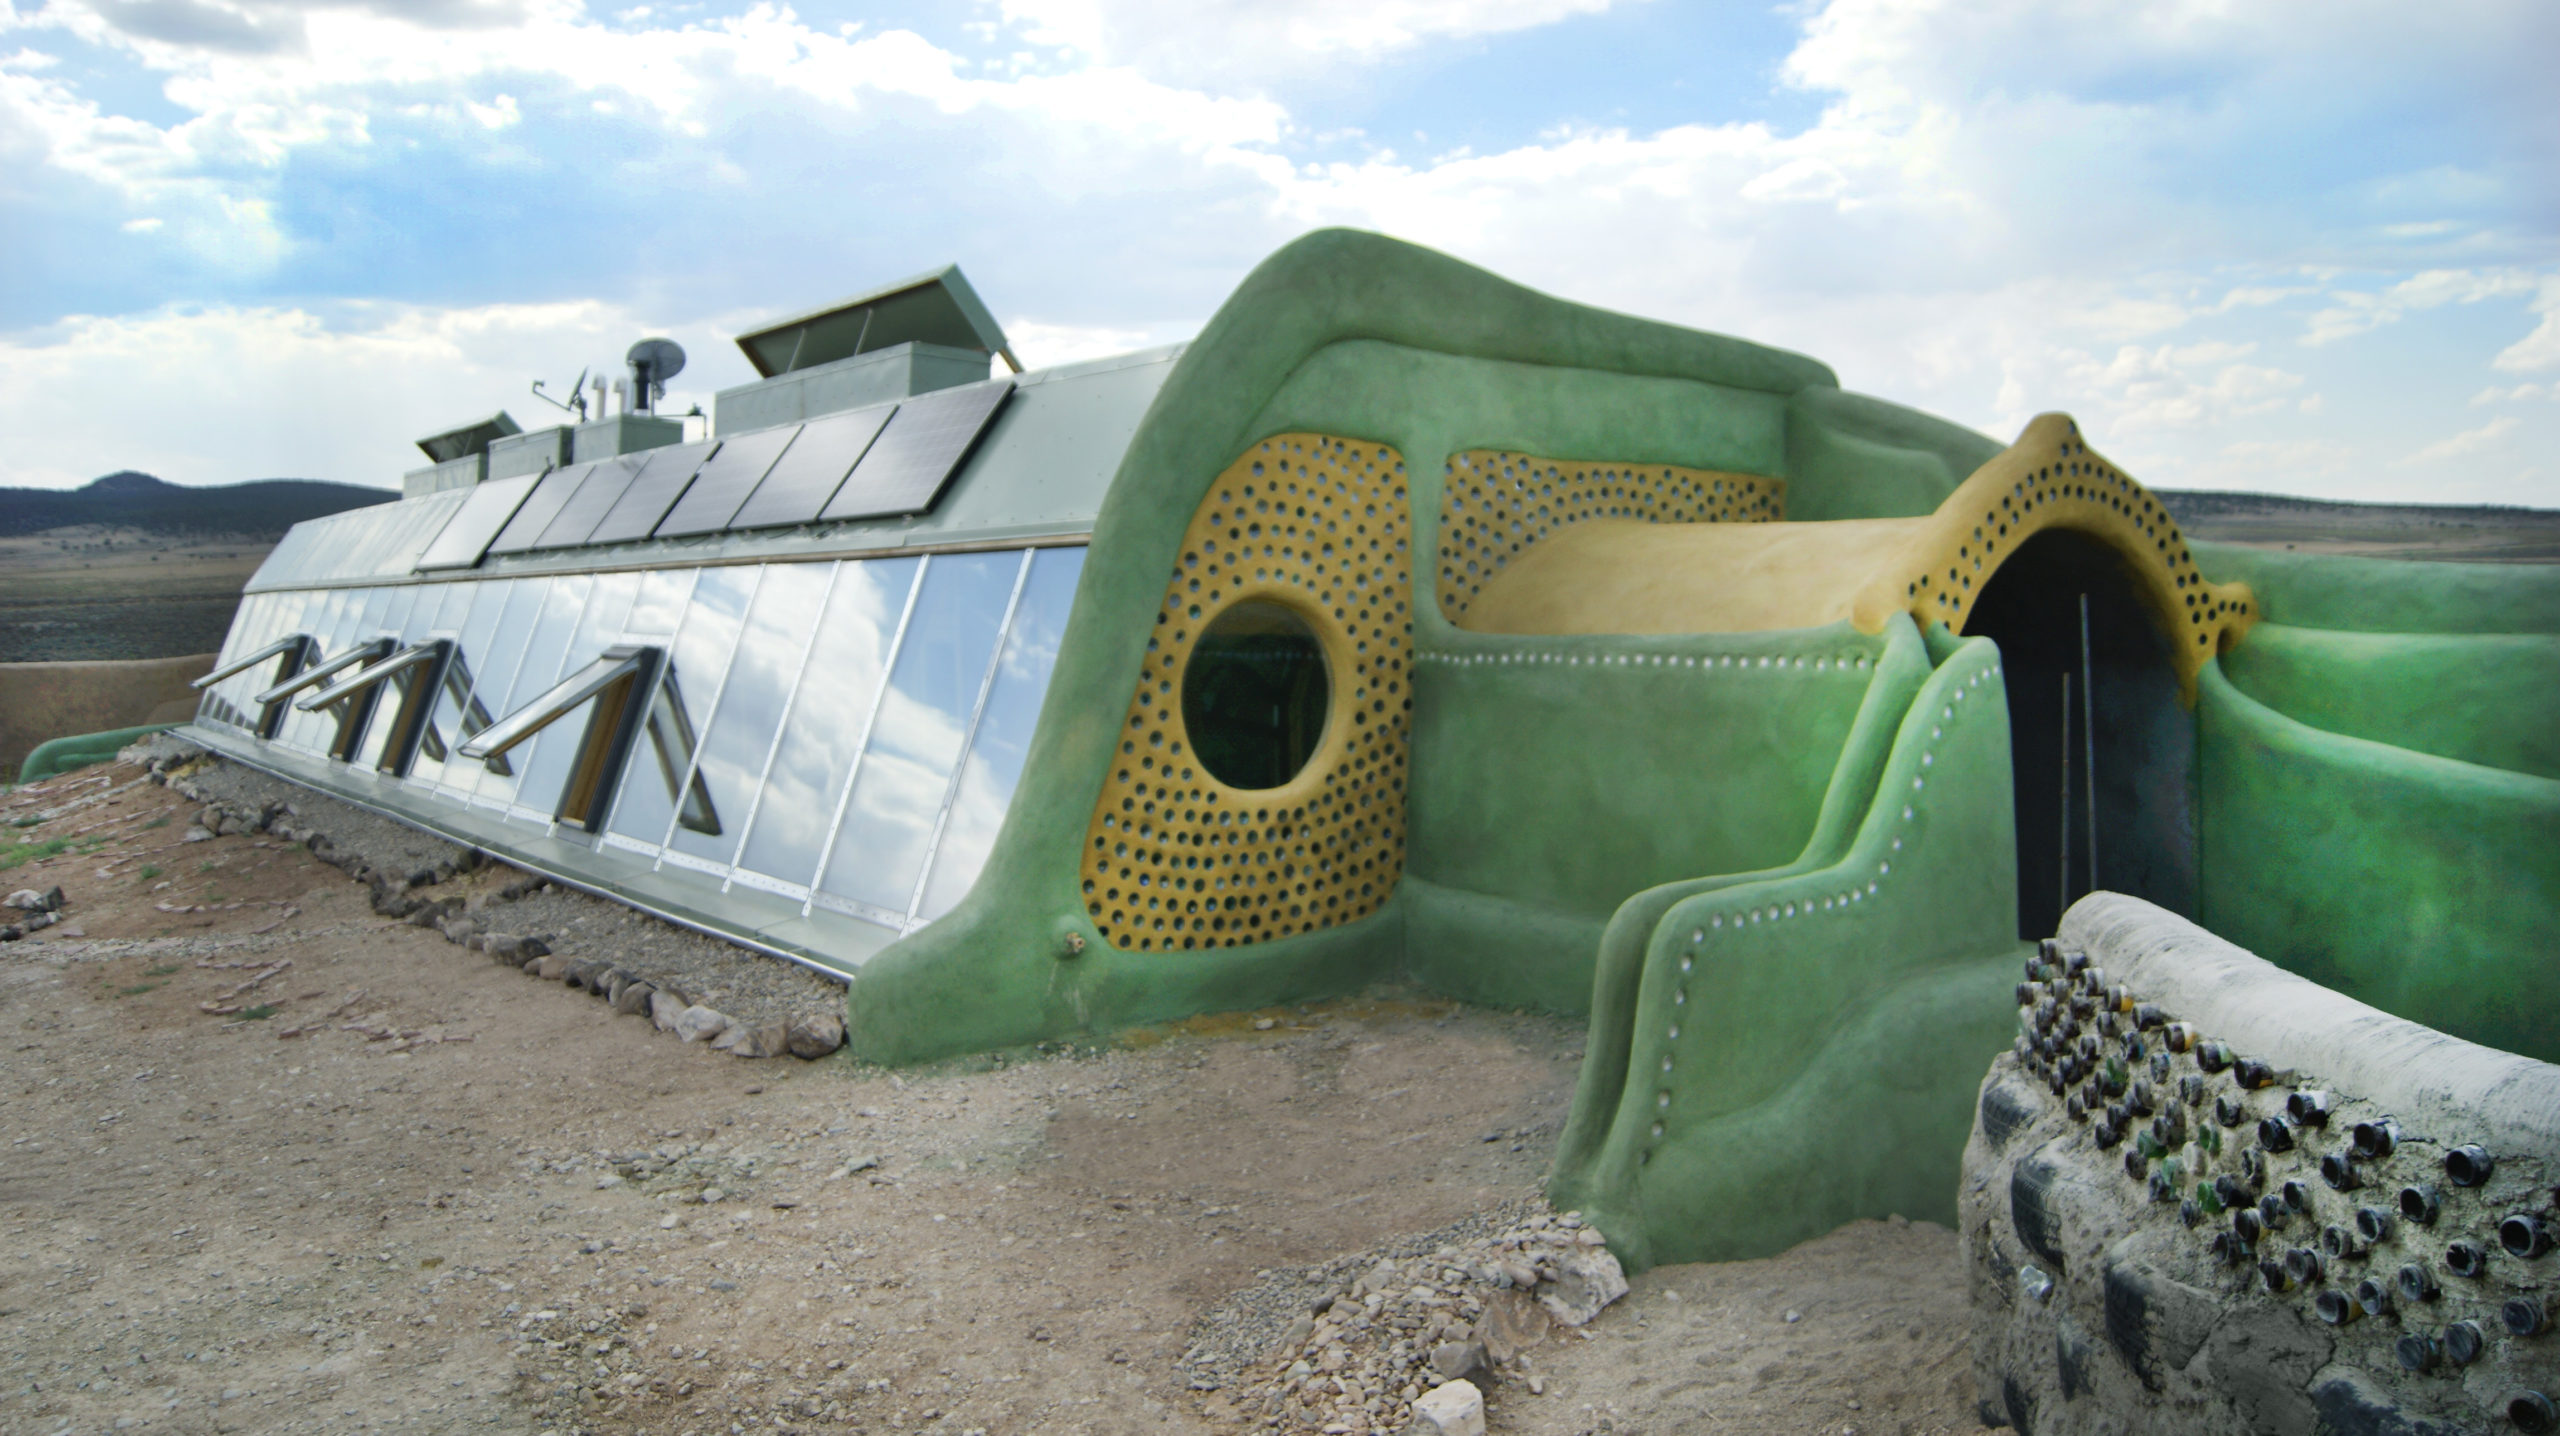 Taos Earthship House Design By Biodiesel33(Own_work, CC BY-SA_3.0)